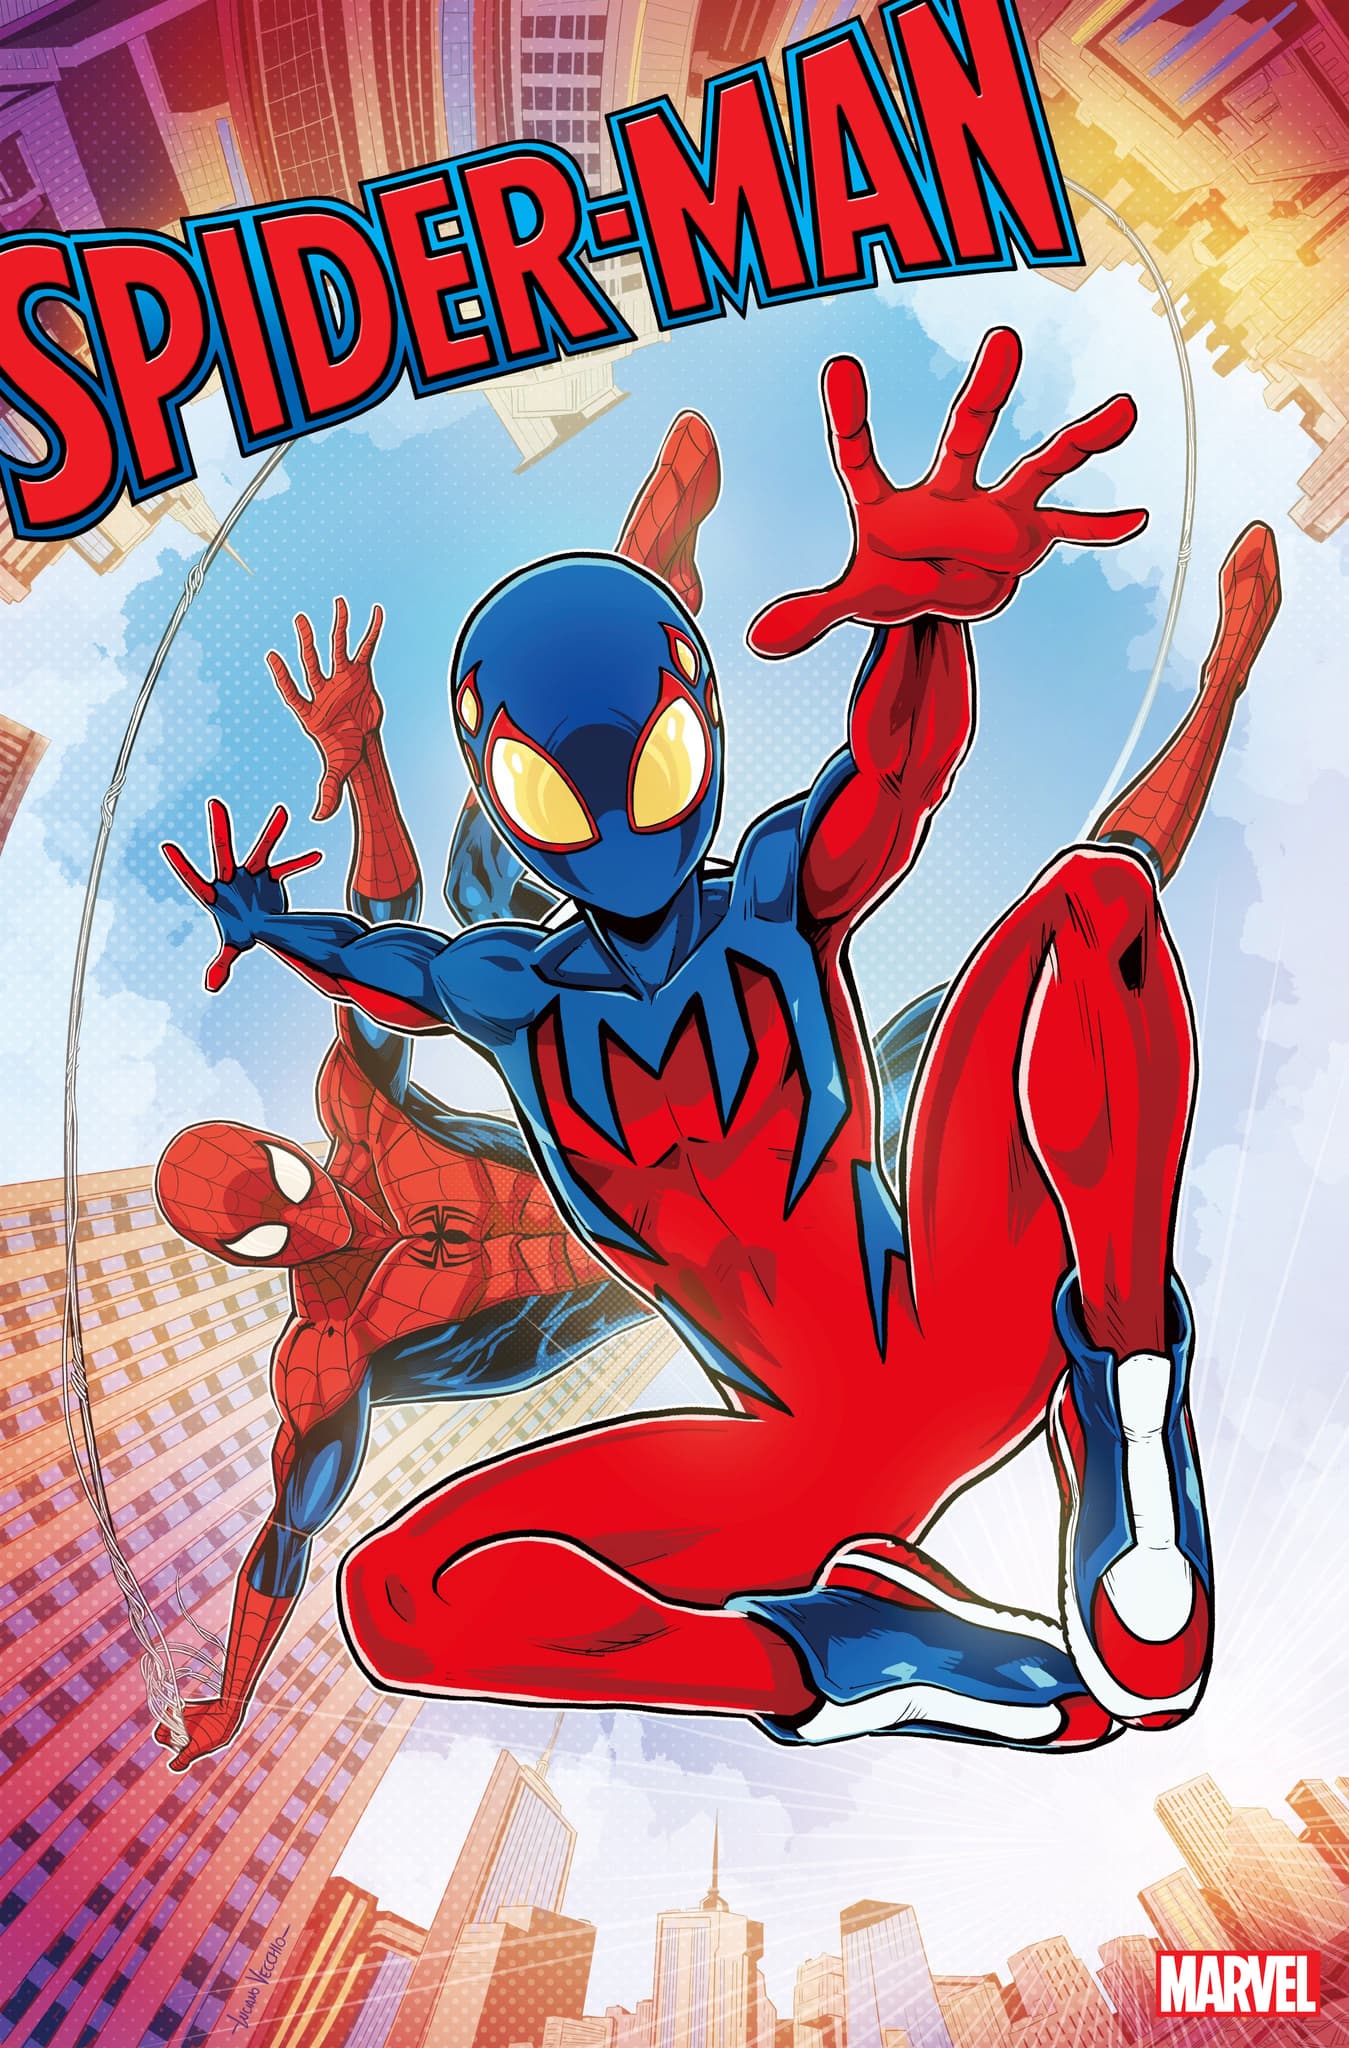 SPIDER-MAN #7 Second Printing Variant Cover by Luciano Vecchio